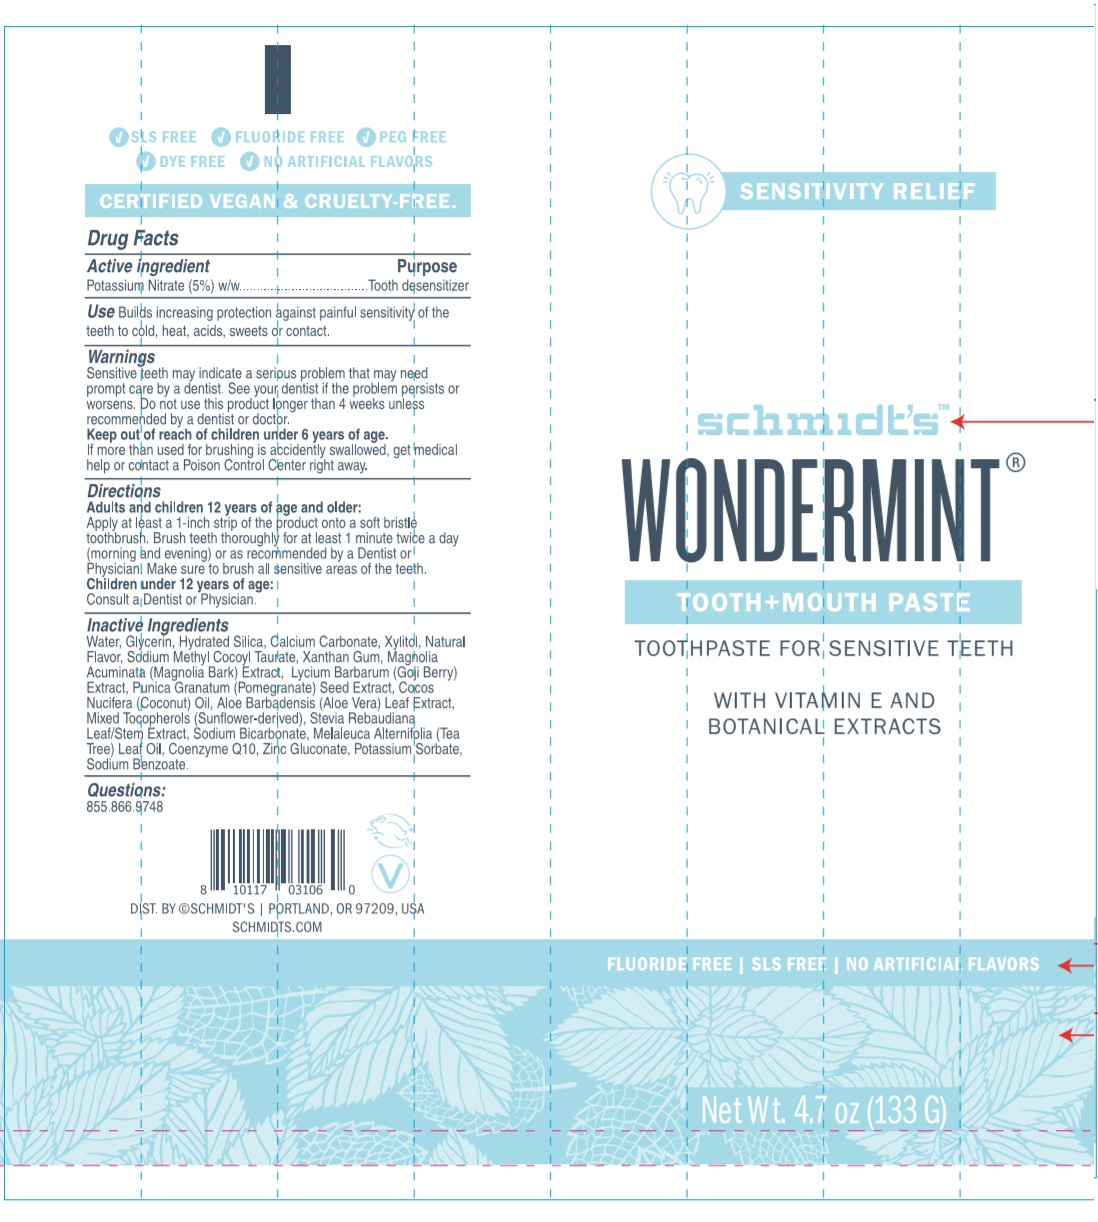 Schmidts Wondermint Tooth And Mouth | Potassium Nitrate Paste, Dentifrice while Breastfeeding